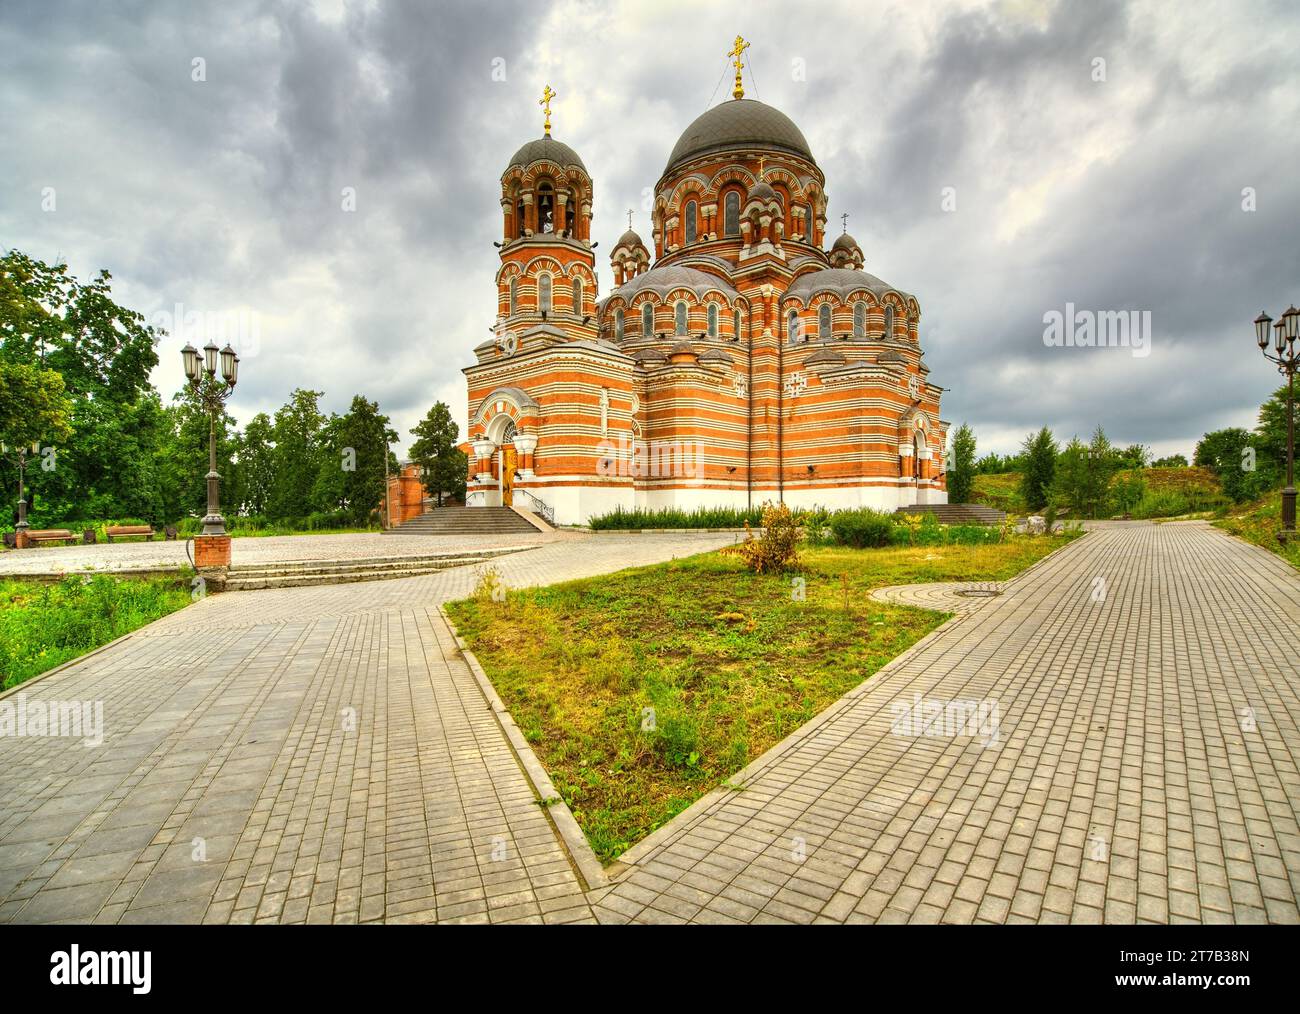 Ancient Christian cathedral. Stock Photo